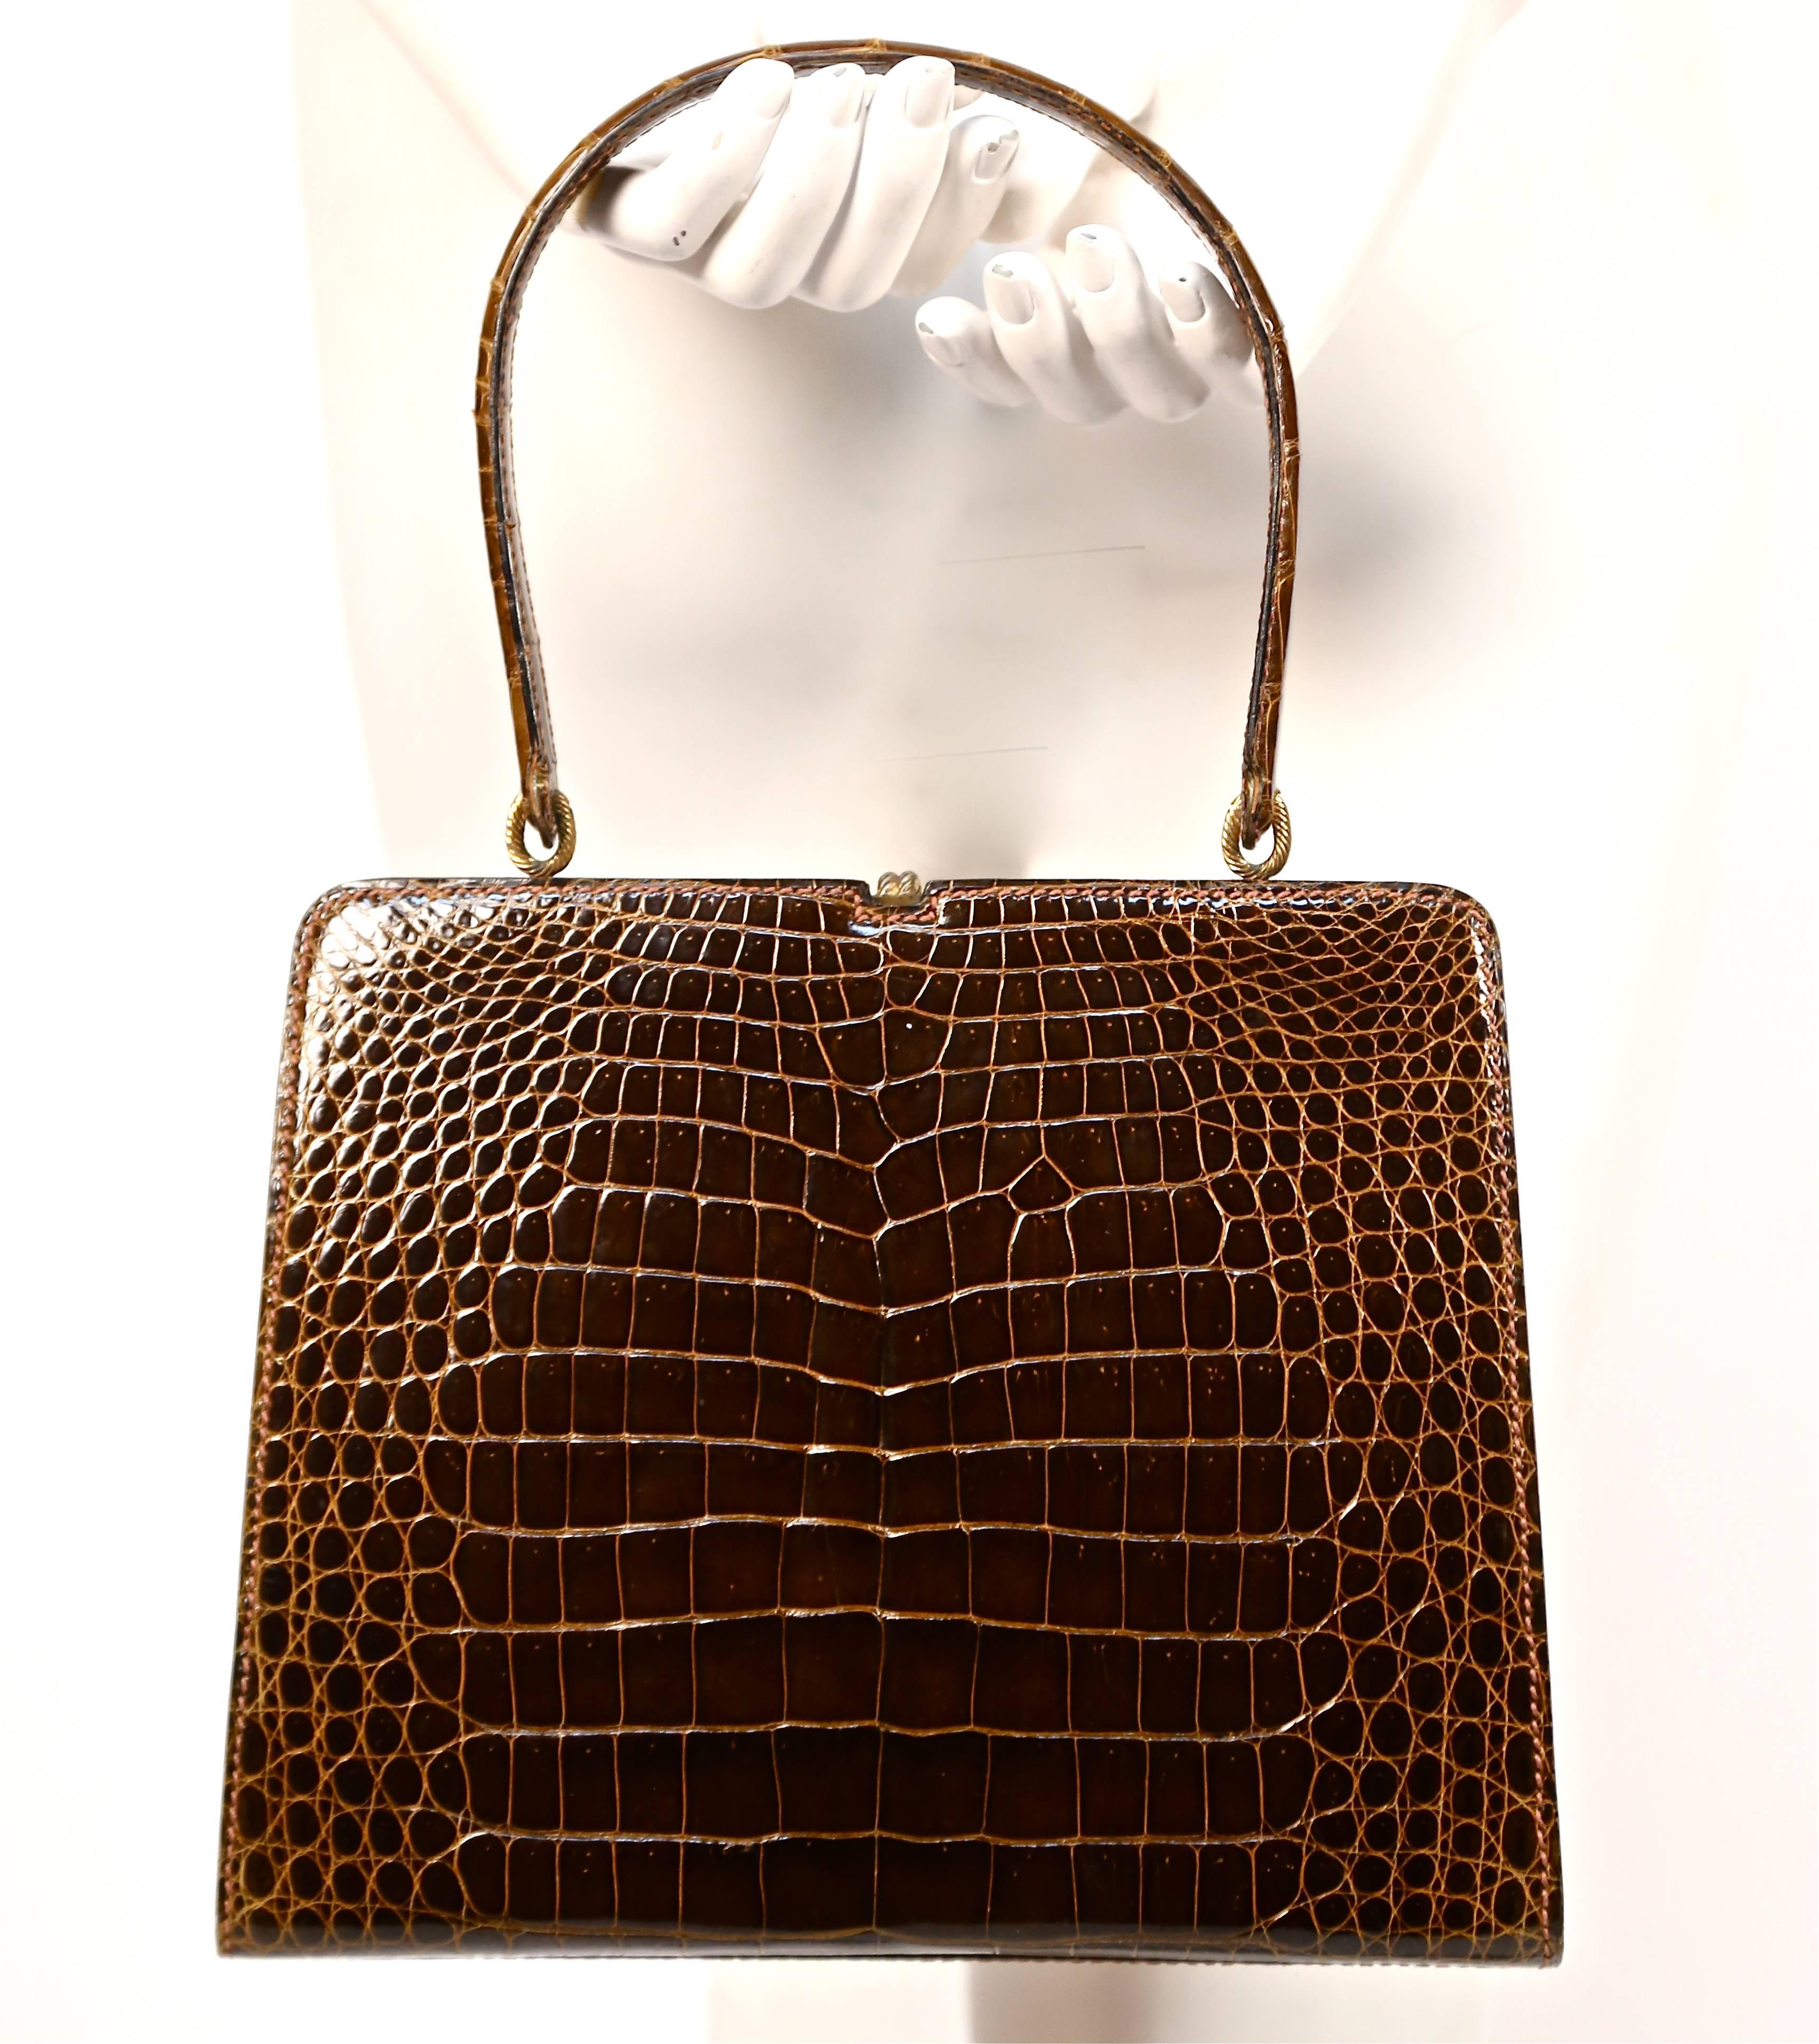 Very rare brown crocodile leather top handle bag with beautiful gilt hardware designed by Loewe dating to the 1960's. Approximate measurements: width at top 8.5